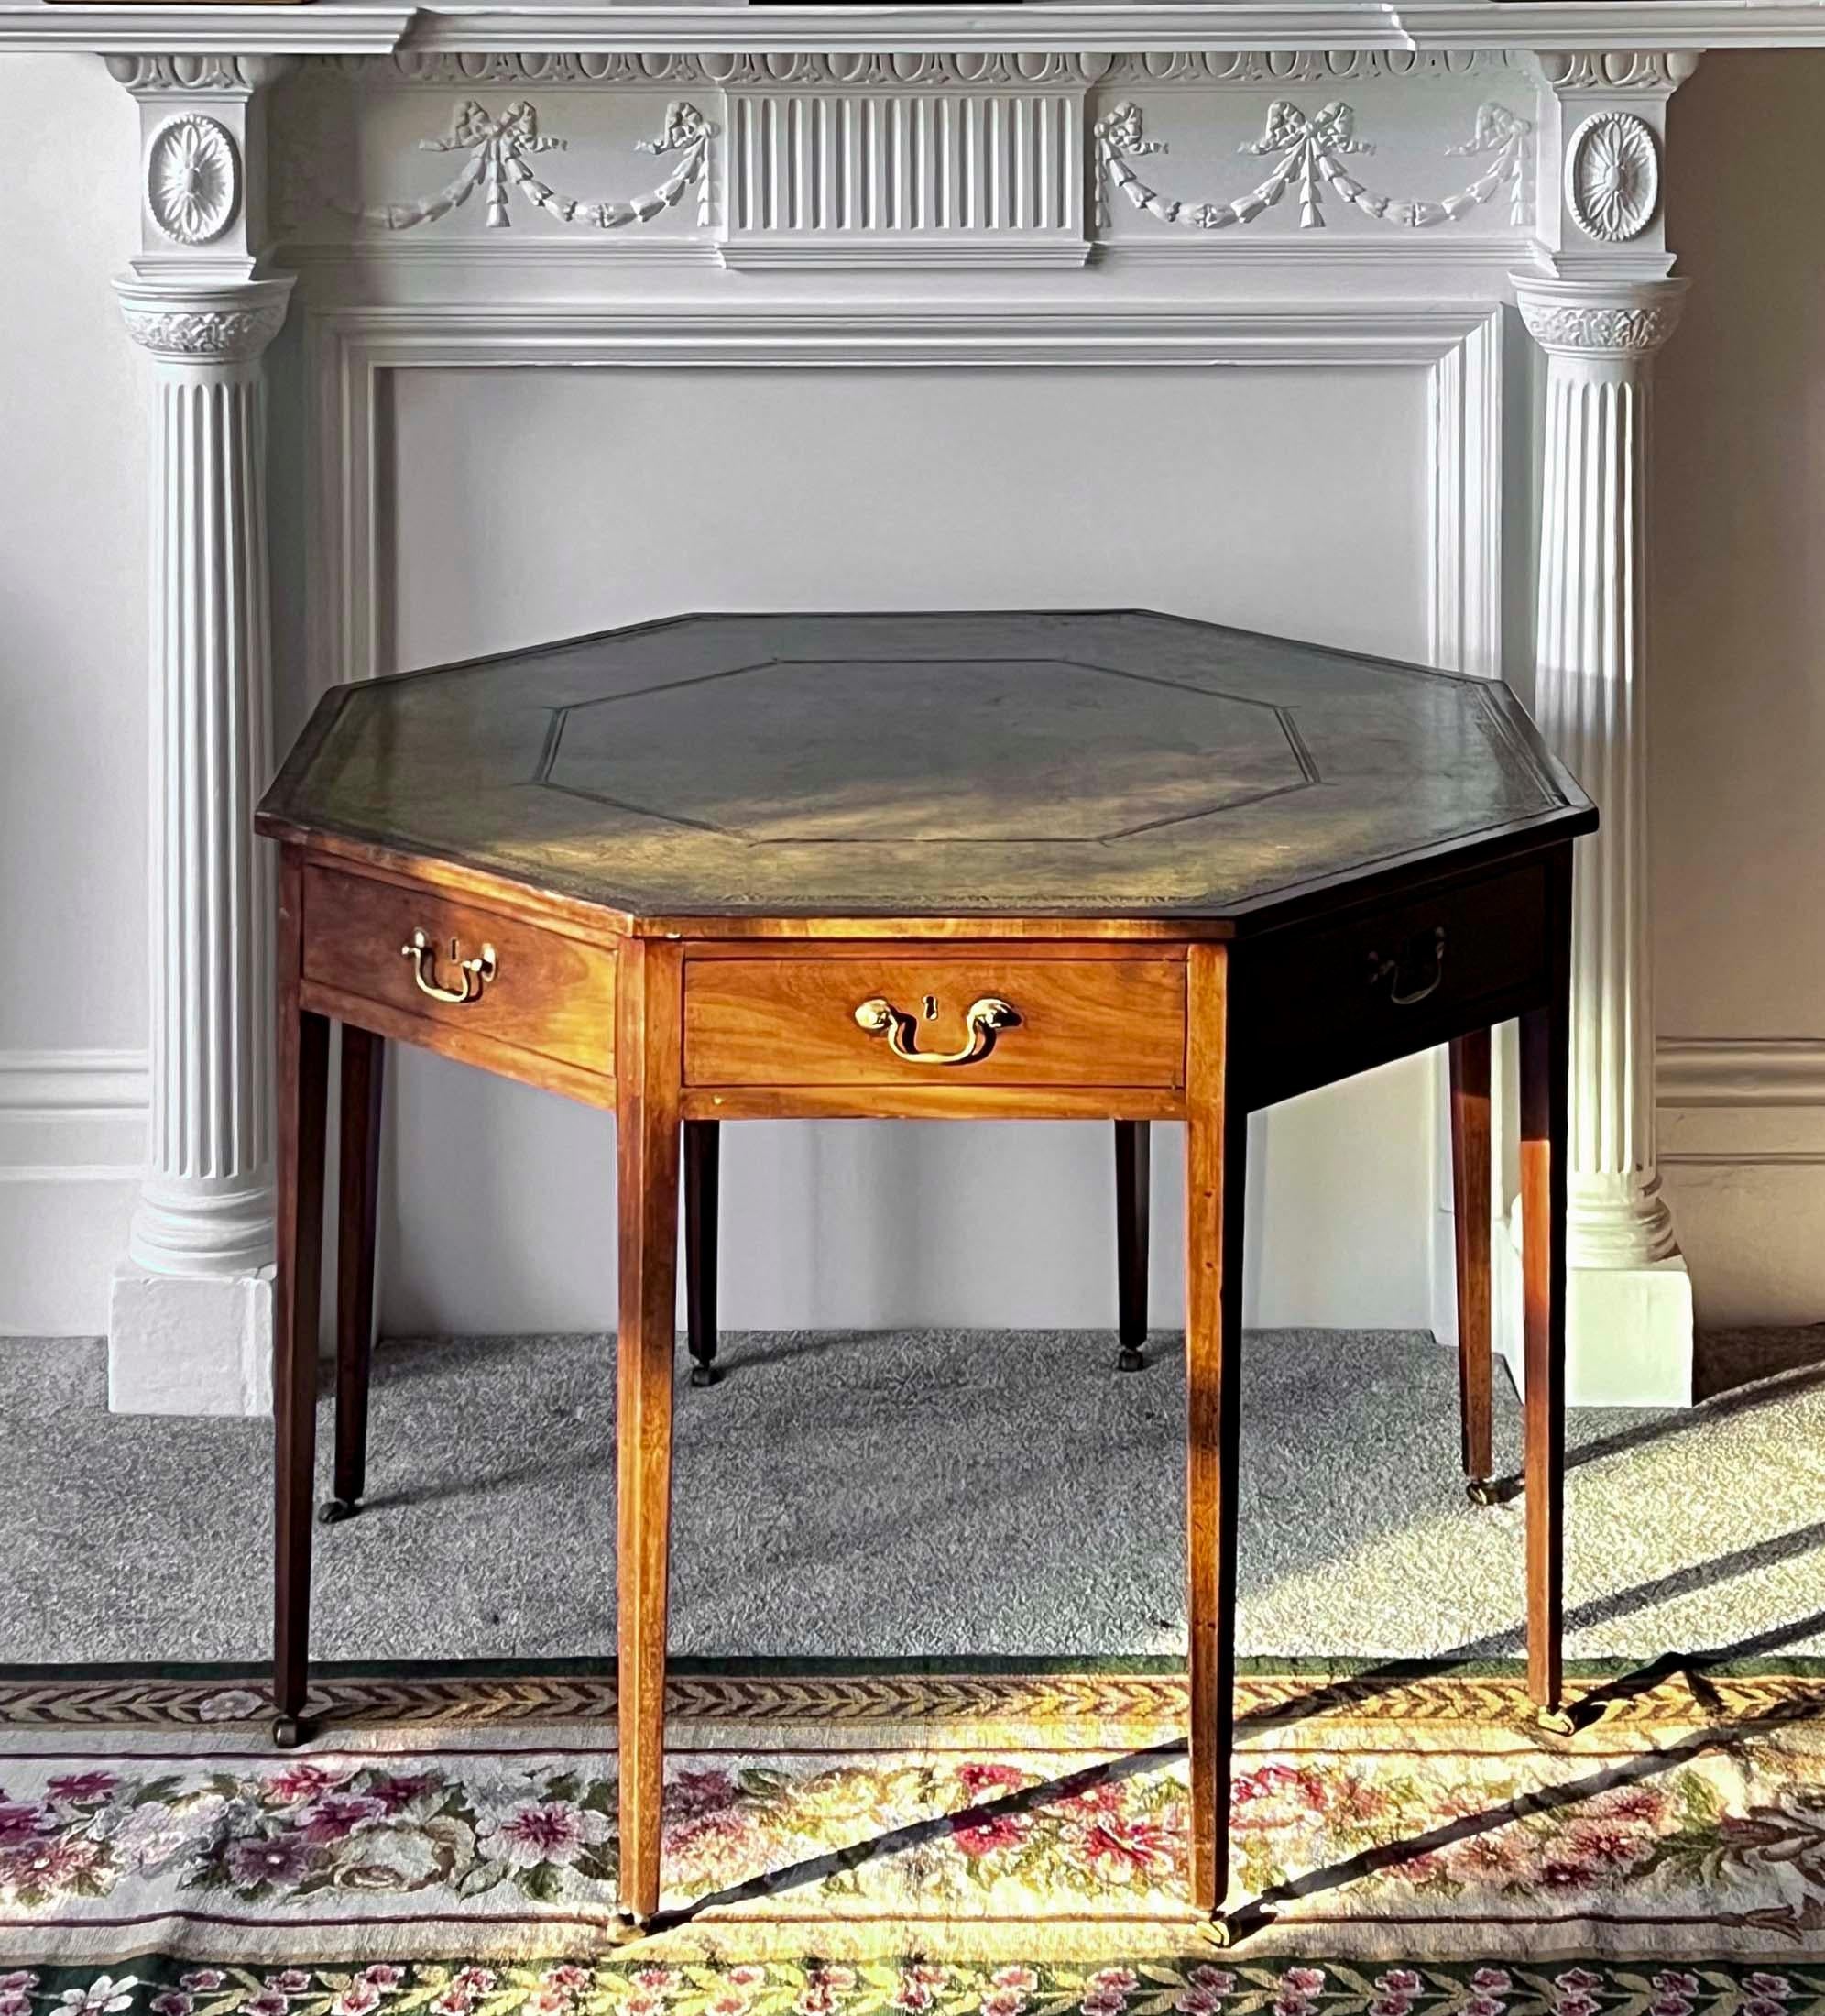 An elegant late George III – early Regency period octagonal library drum table with aged green leather lined top and four drawers
English, circa 1800.

Why we like it
Unusual and elegantly understated, this table is useful and versatile with its